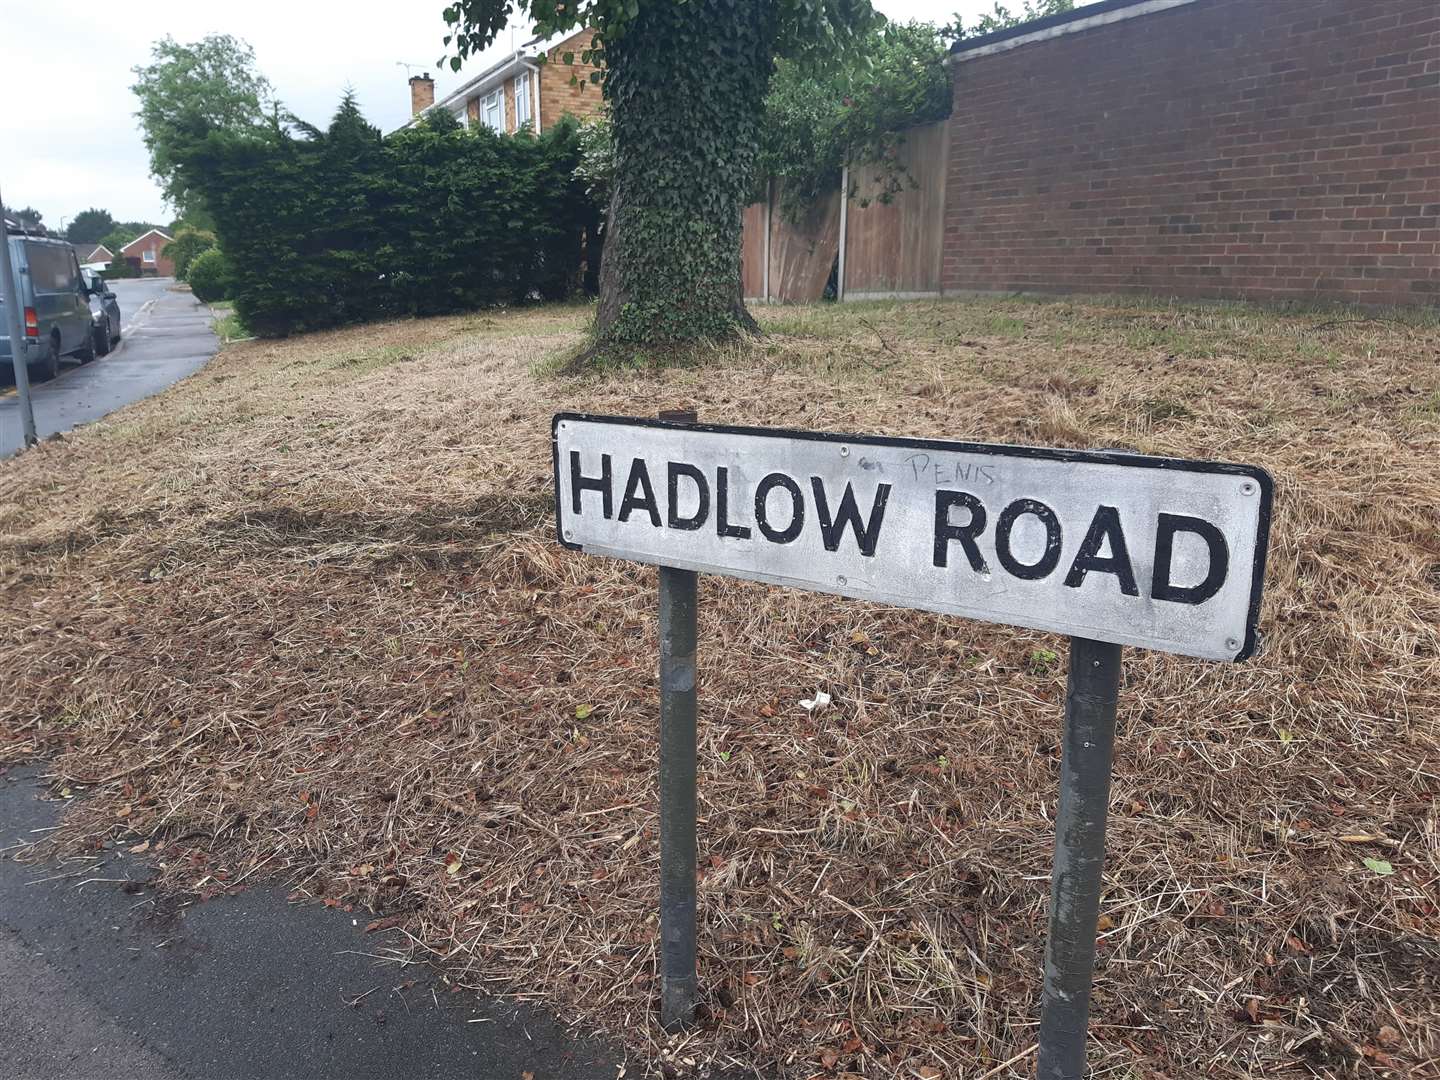 All the attacks took place close to Hadlow Road where the Moses live